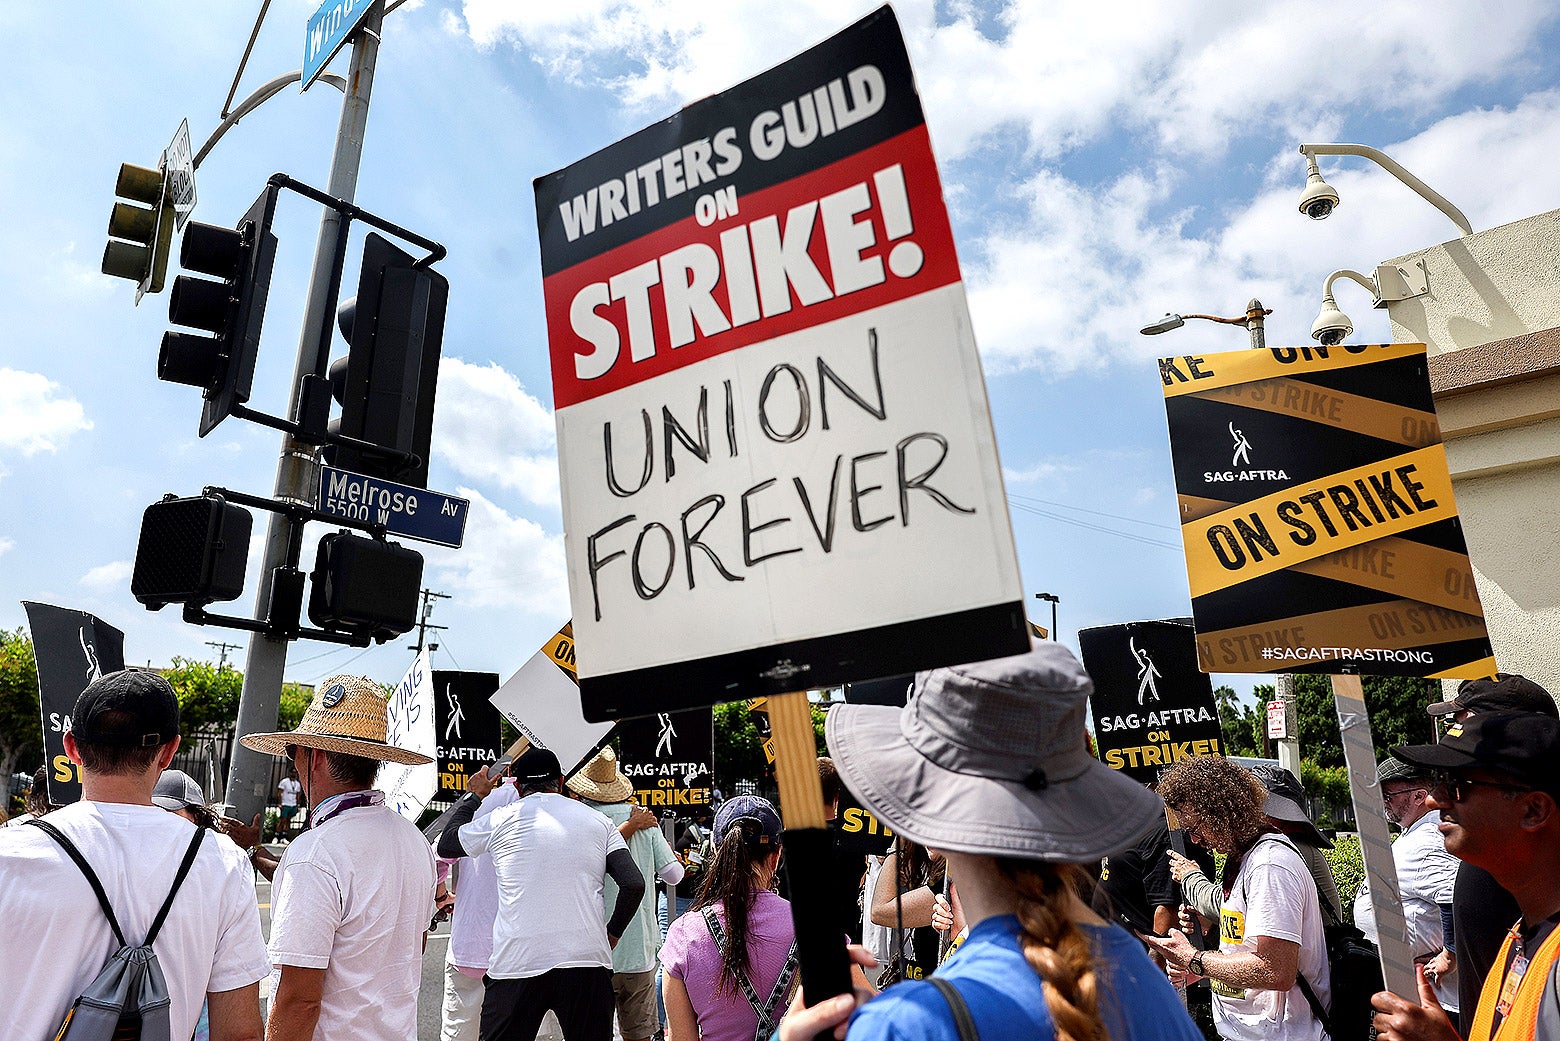 People hold signs that say things like "Writers Guild on Strike. Union forever."